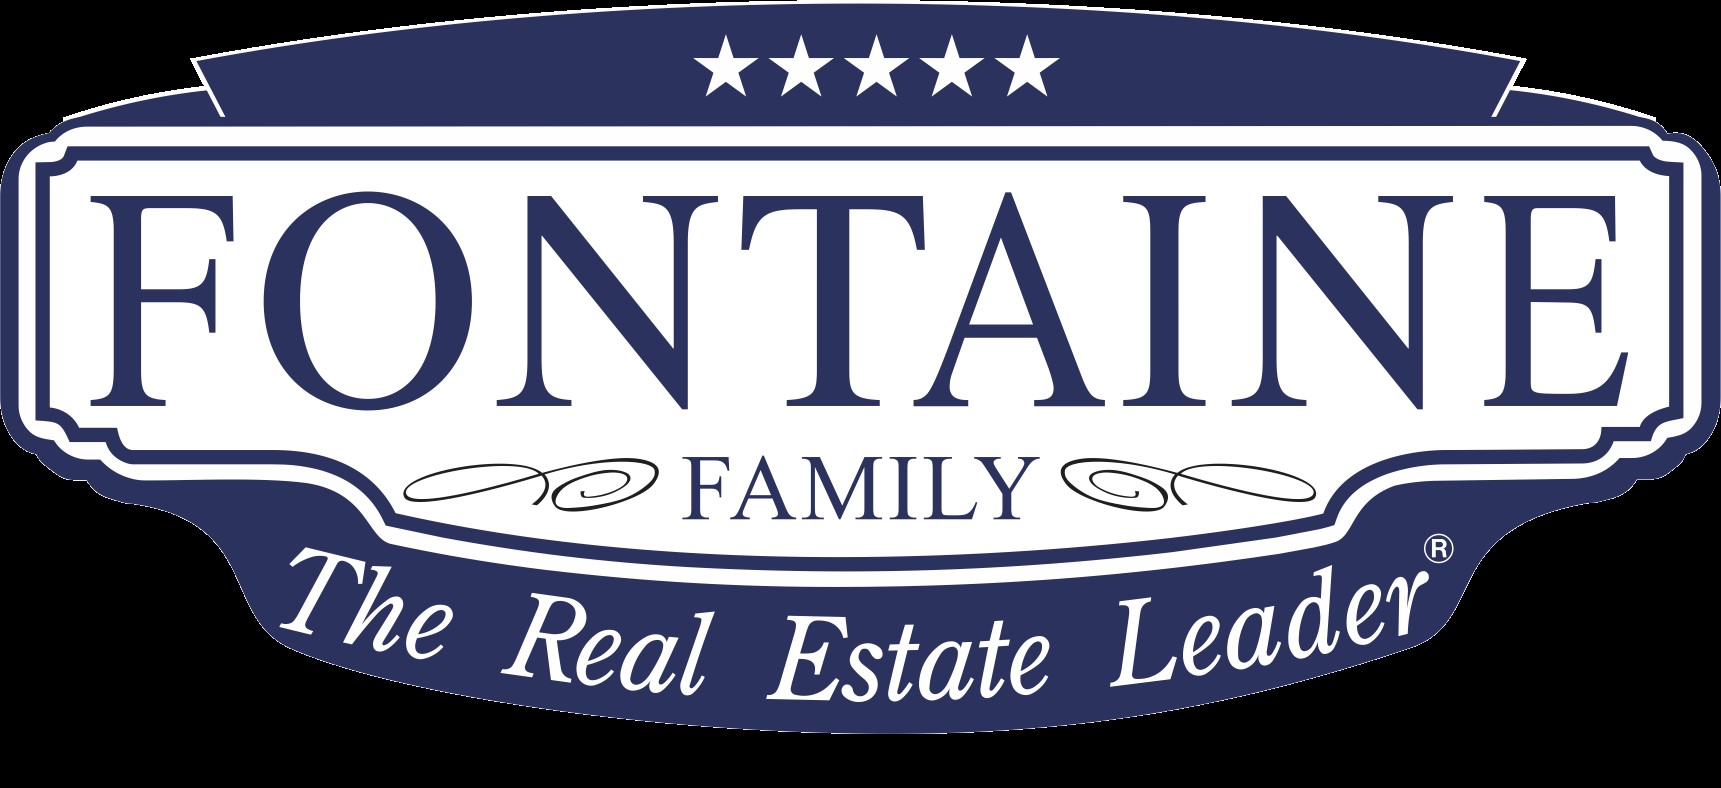 Fontaine Family-The Real Estate Leader logo